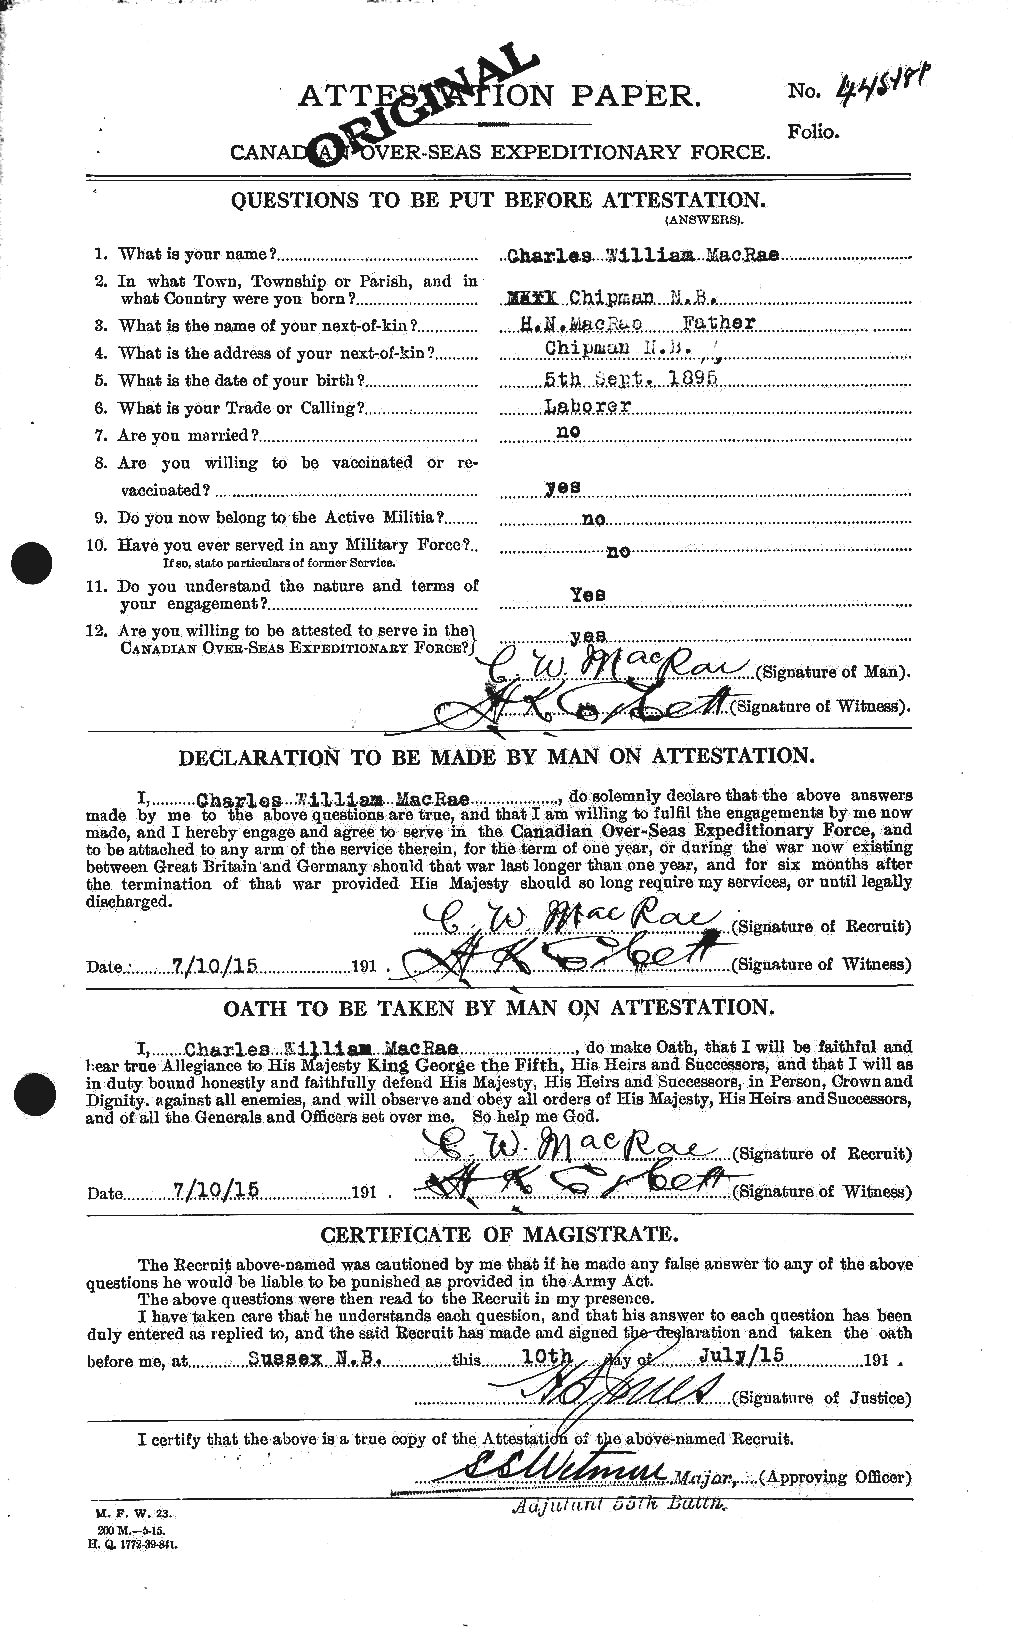 Personnel Records of the First World War - CEF 548246a